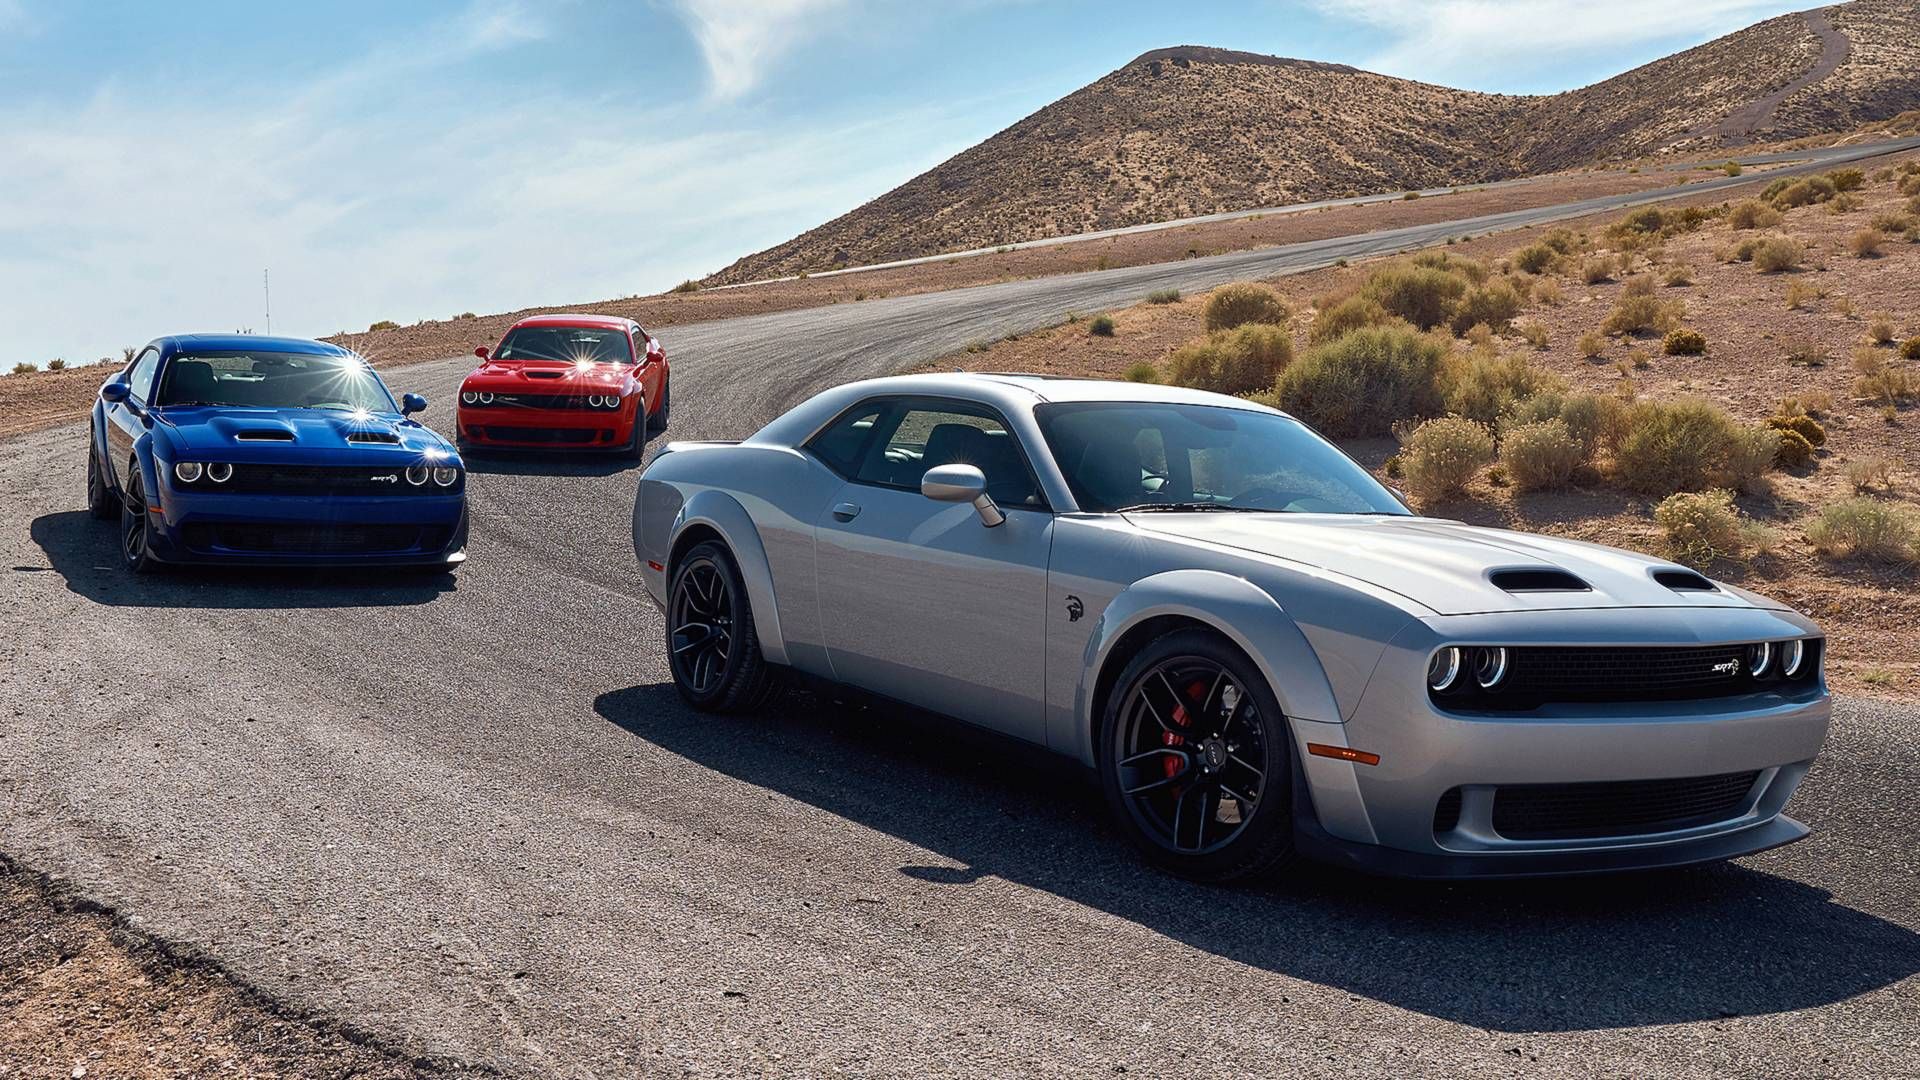 silver, red and blue hellcats on the road